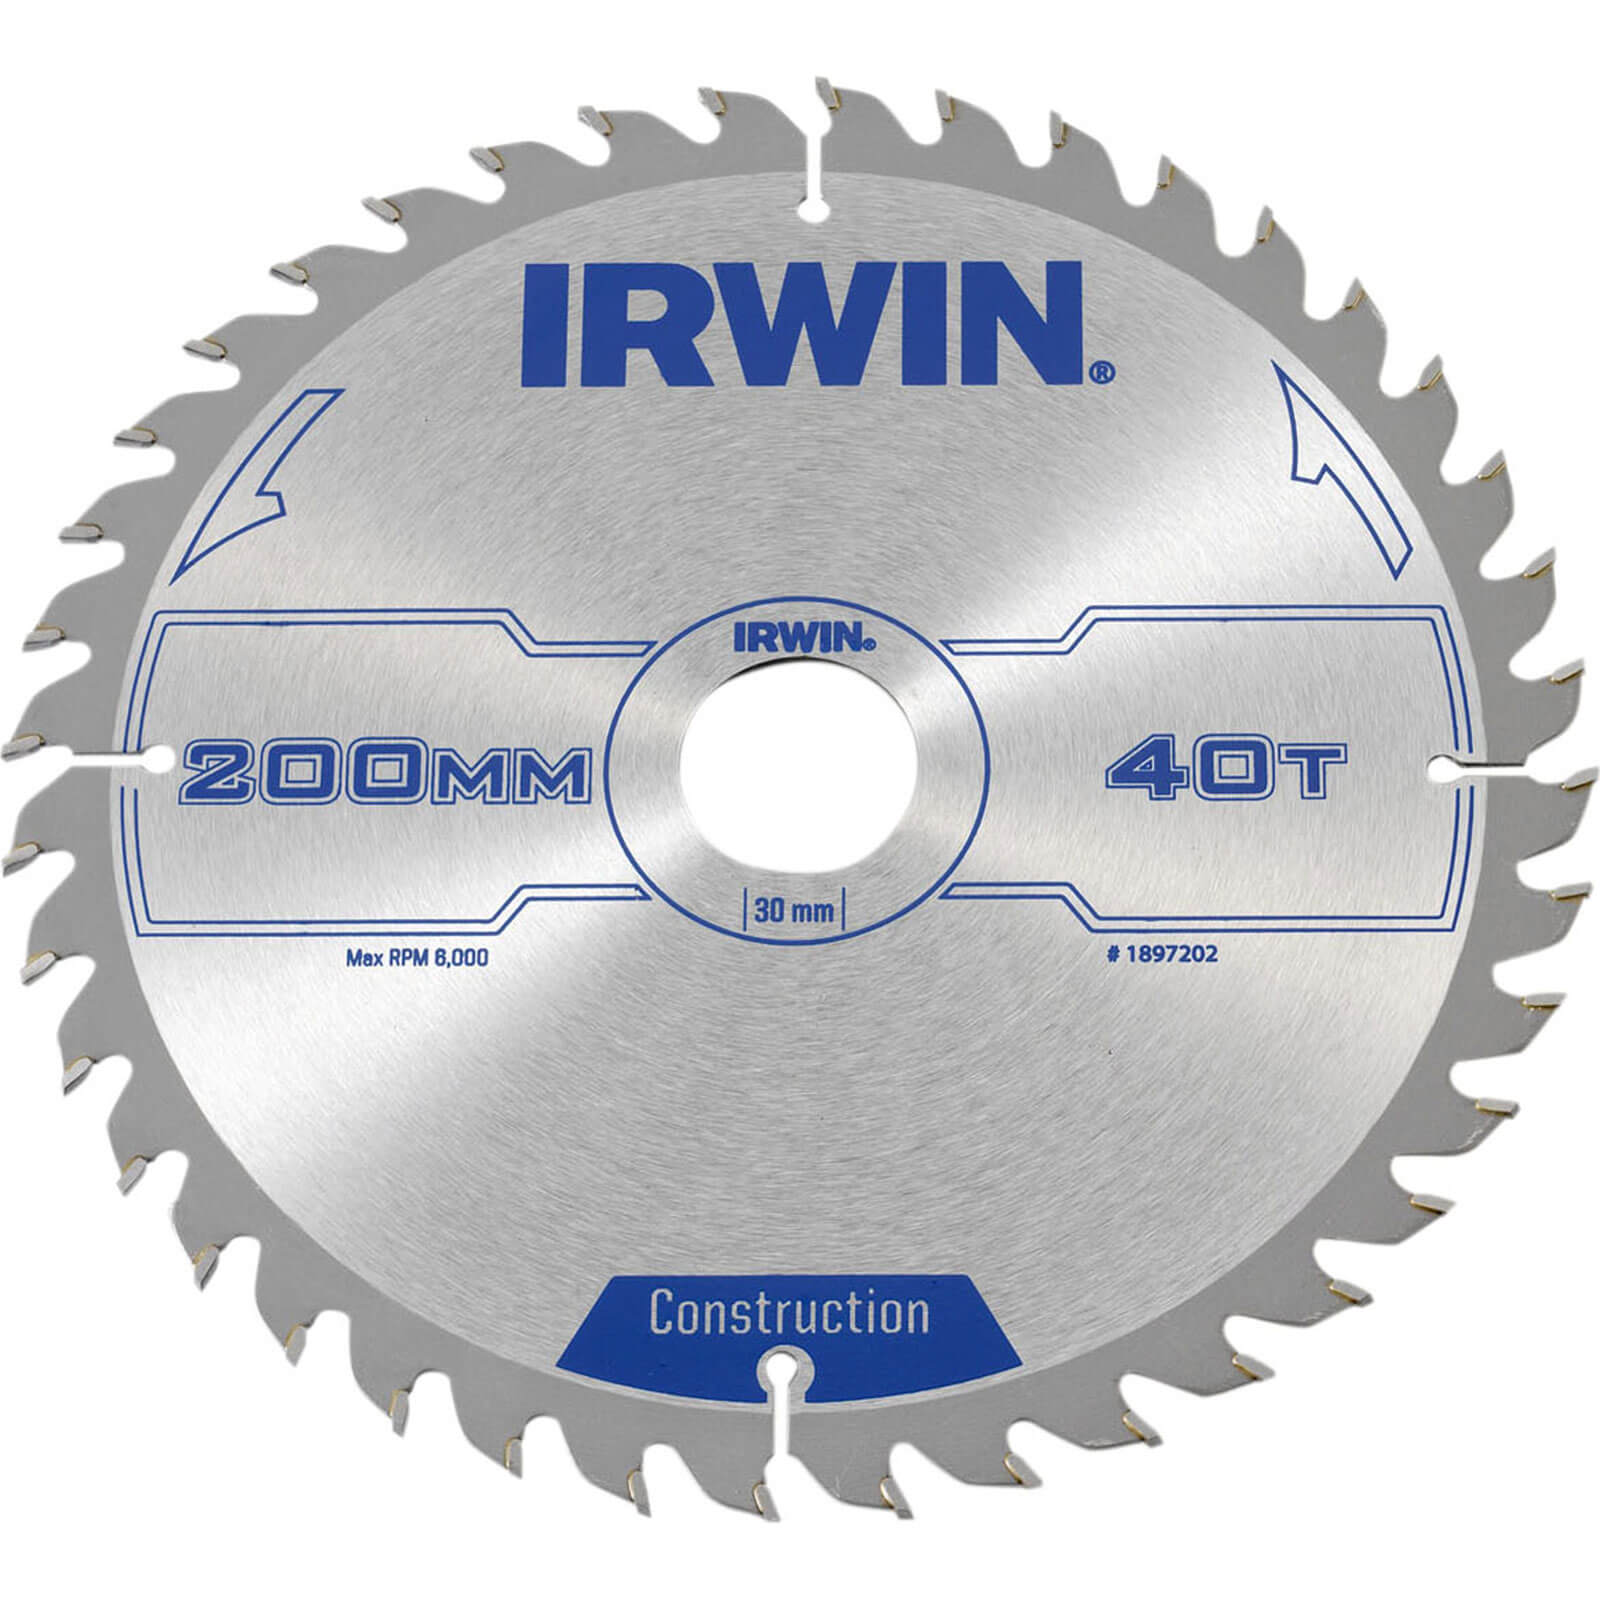 Photo of Irwin Atb Construction Circular Saw Blade 200mm 40t 30mm